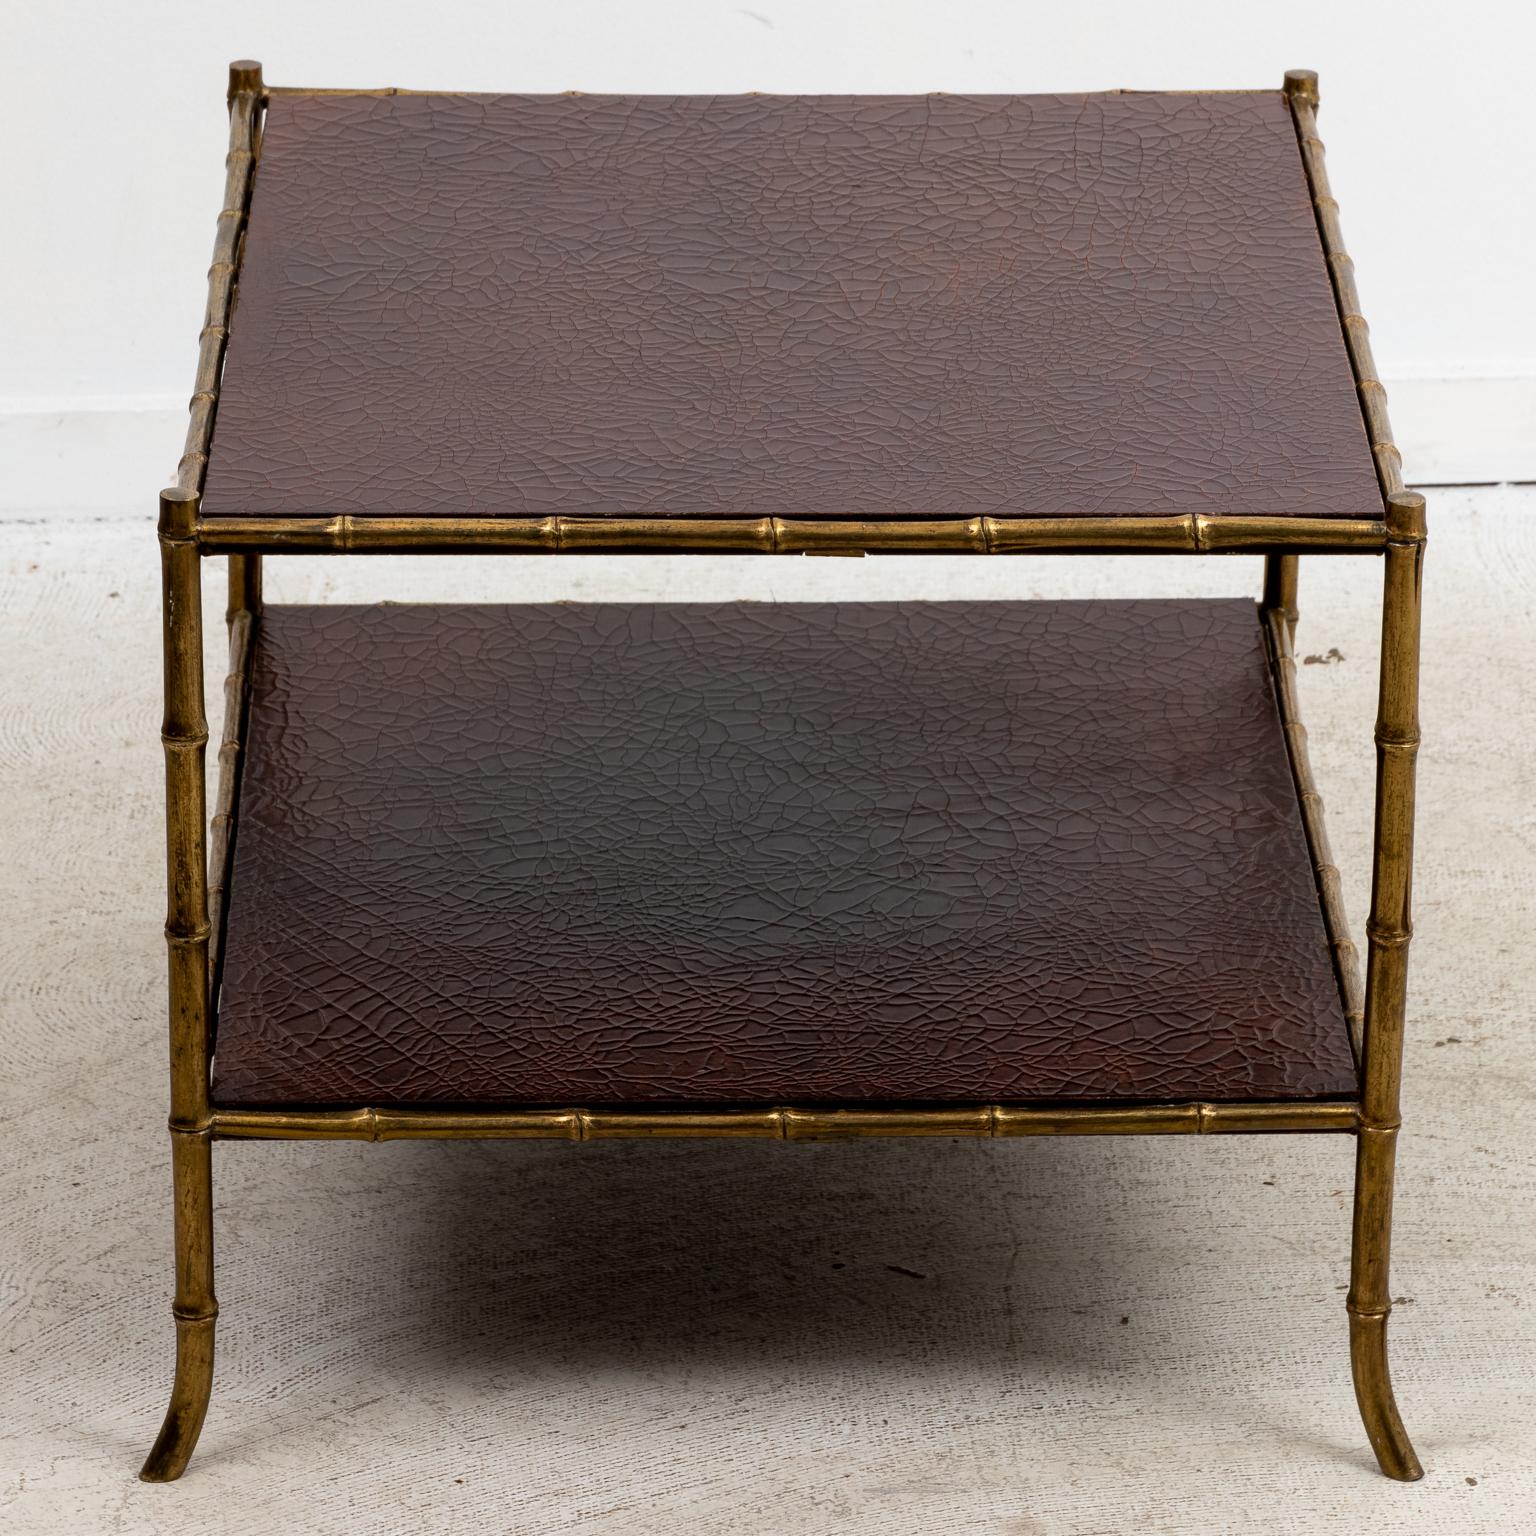 Circa 1940s Maison Jansen attributed brass and brown leather two tiered end table in the French Empire style with faux bamboo brass legs. Made in France. Please note of wear consistent with age including minor brass tarnish as seen on the feet.